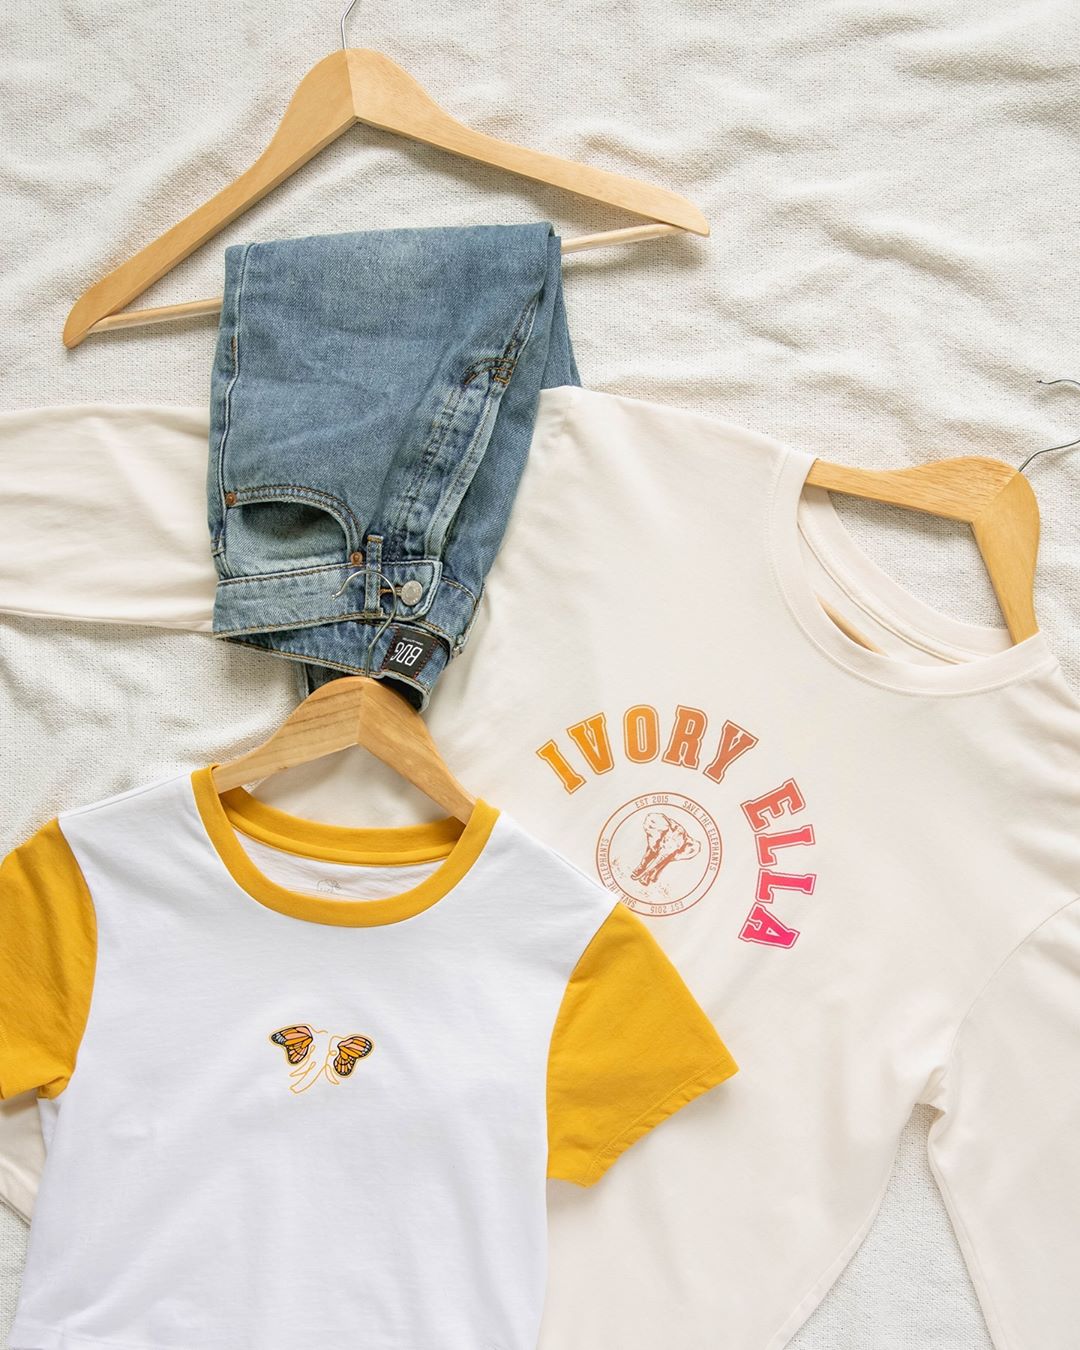 Ivory Ella - Falling in love with new graphics 💛 💖 Have you visited our site today? Play a special Spin-to-Win for your chance to unlock up tp 40% off! Link in bio 😊 #DreamBigDoGood #GoingPlaces